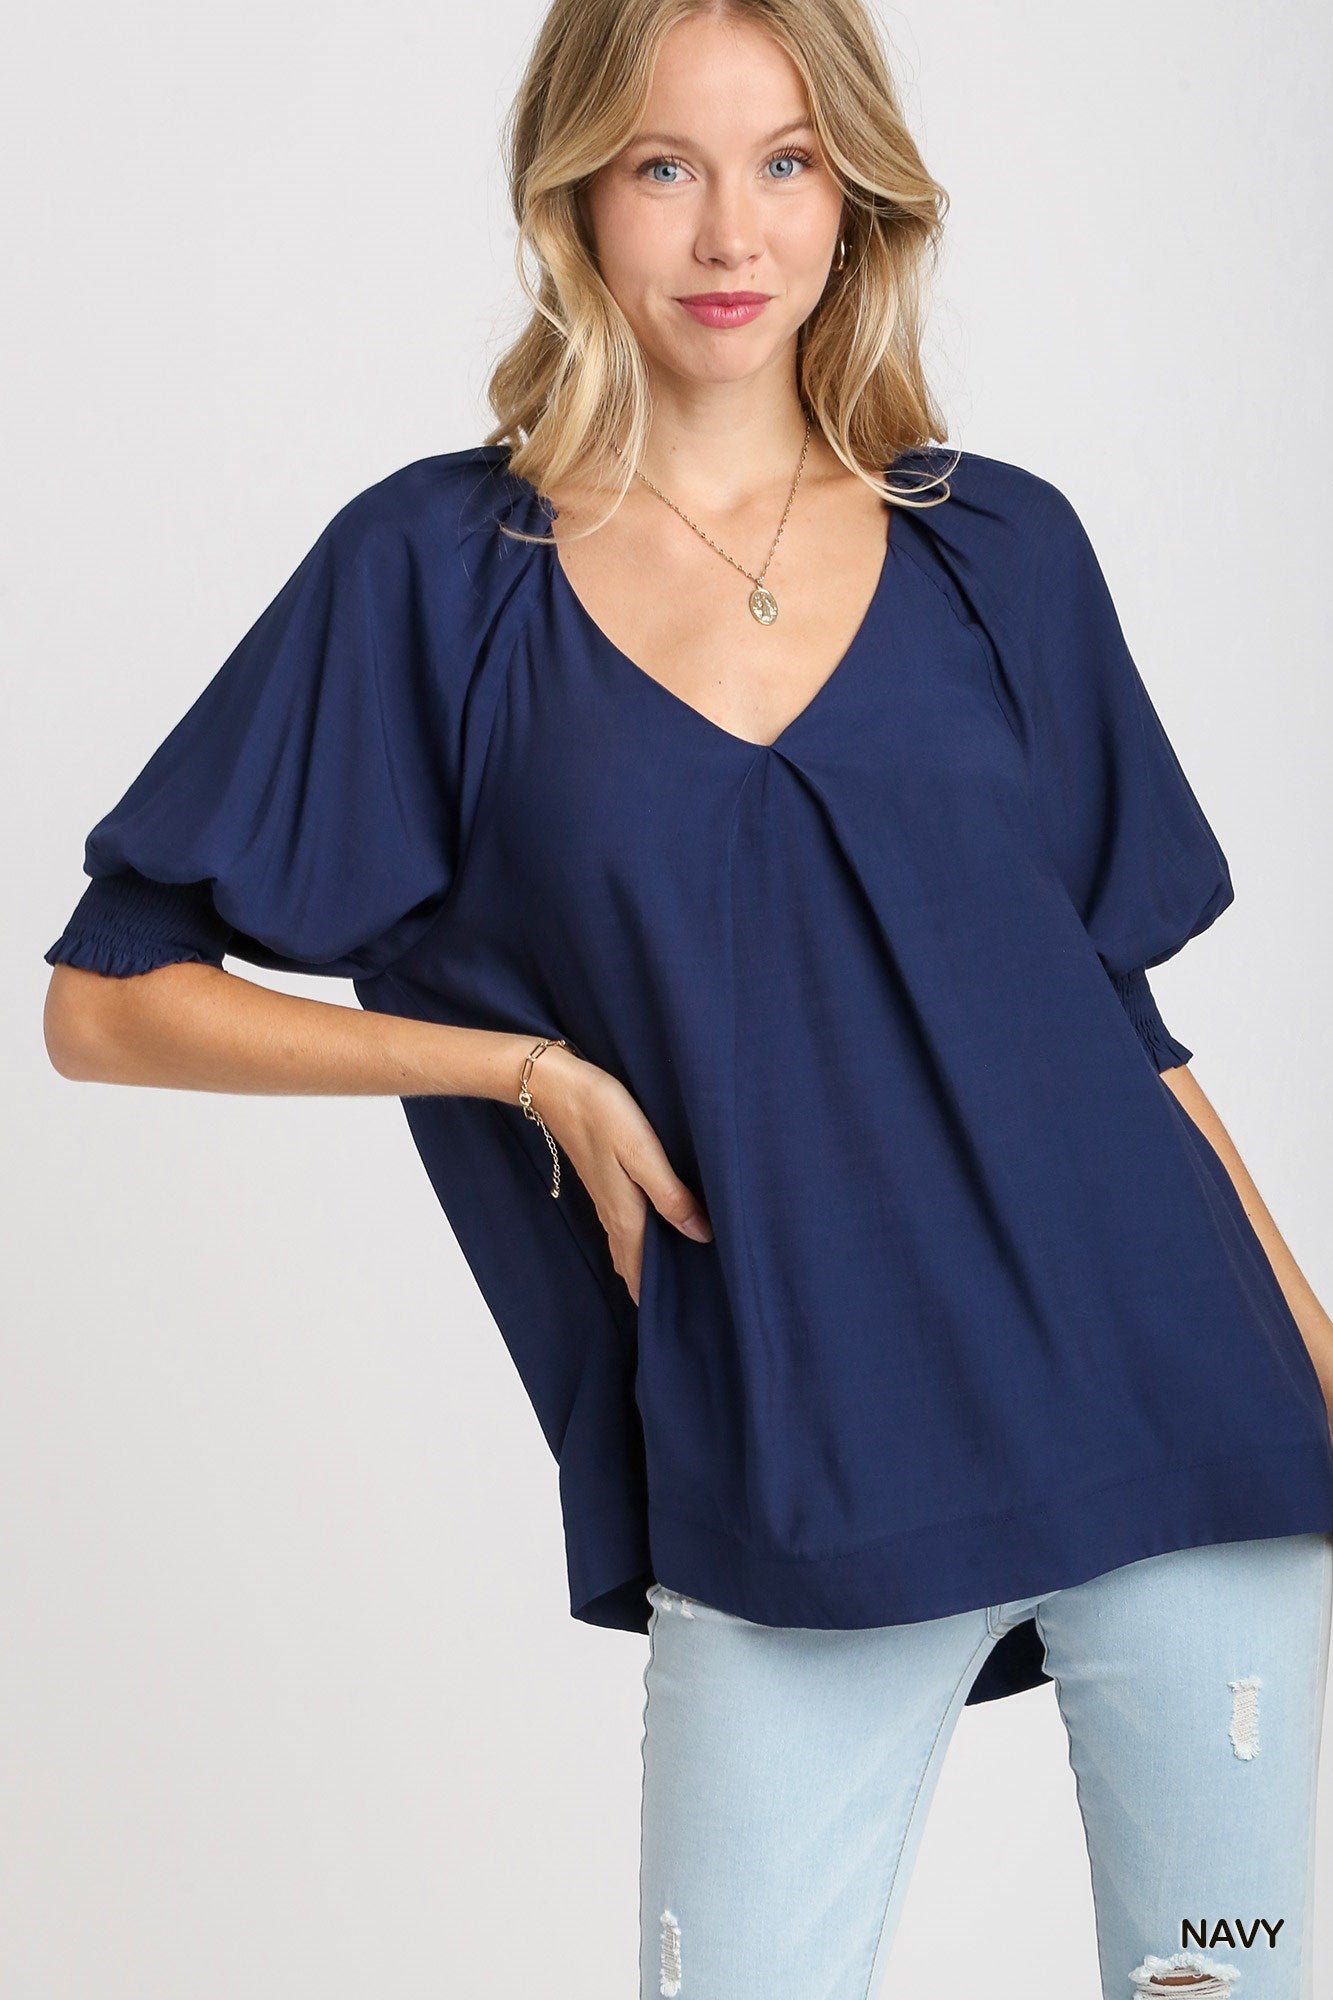 The Cail Top